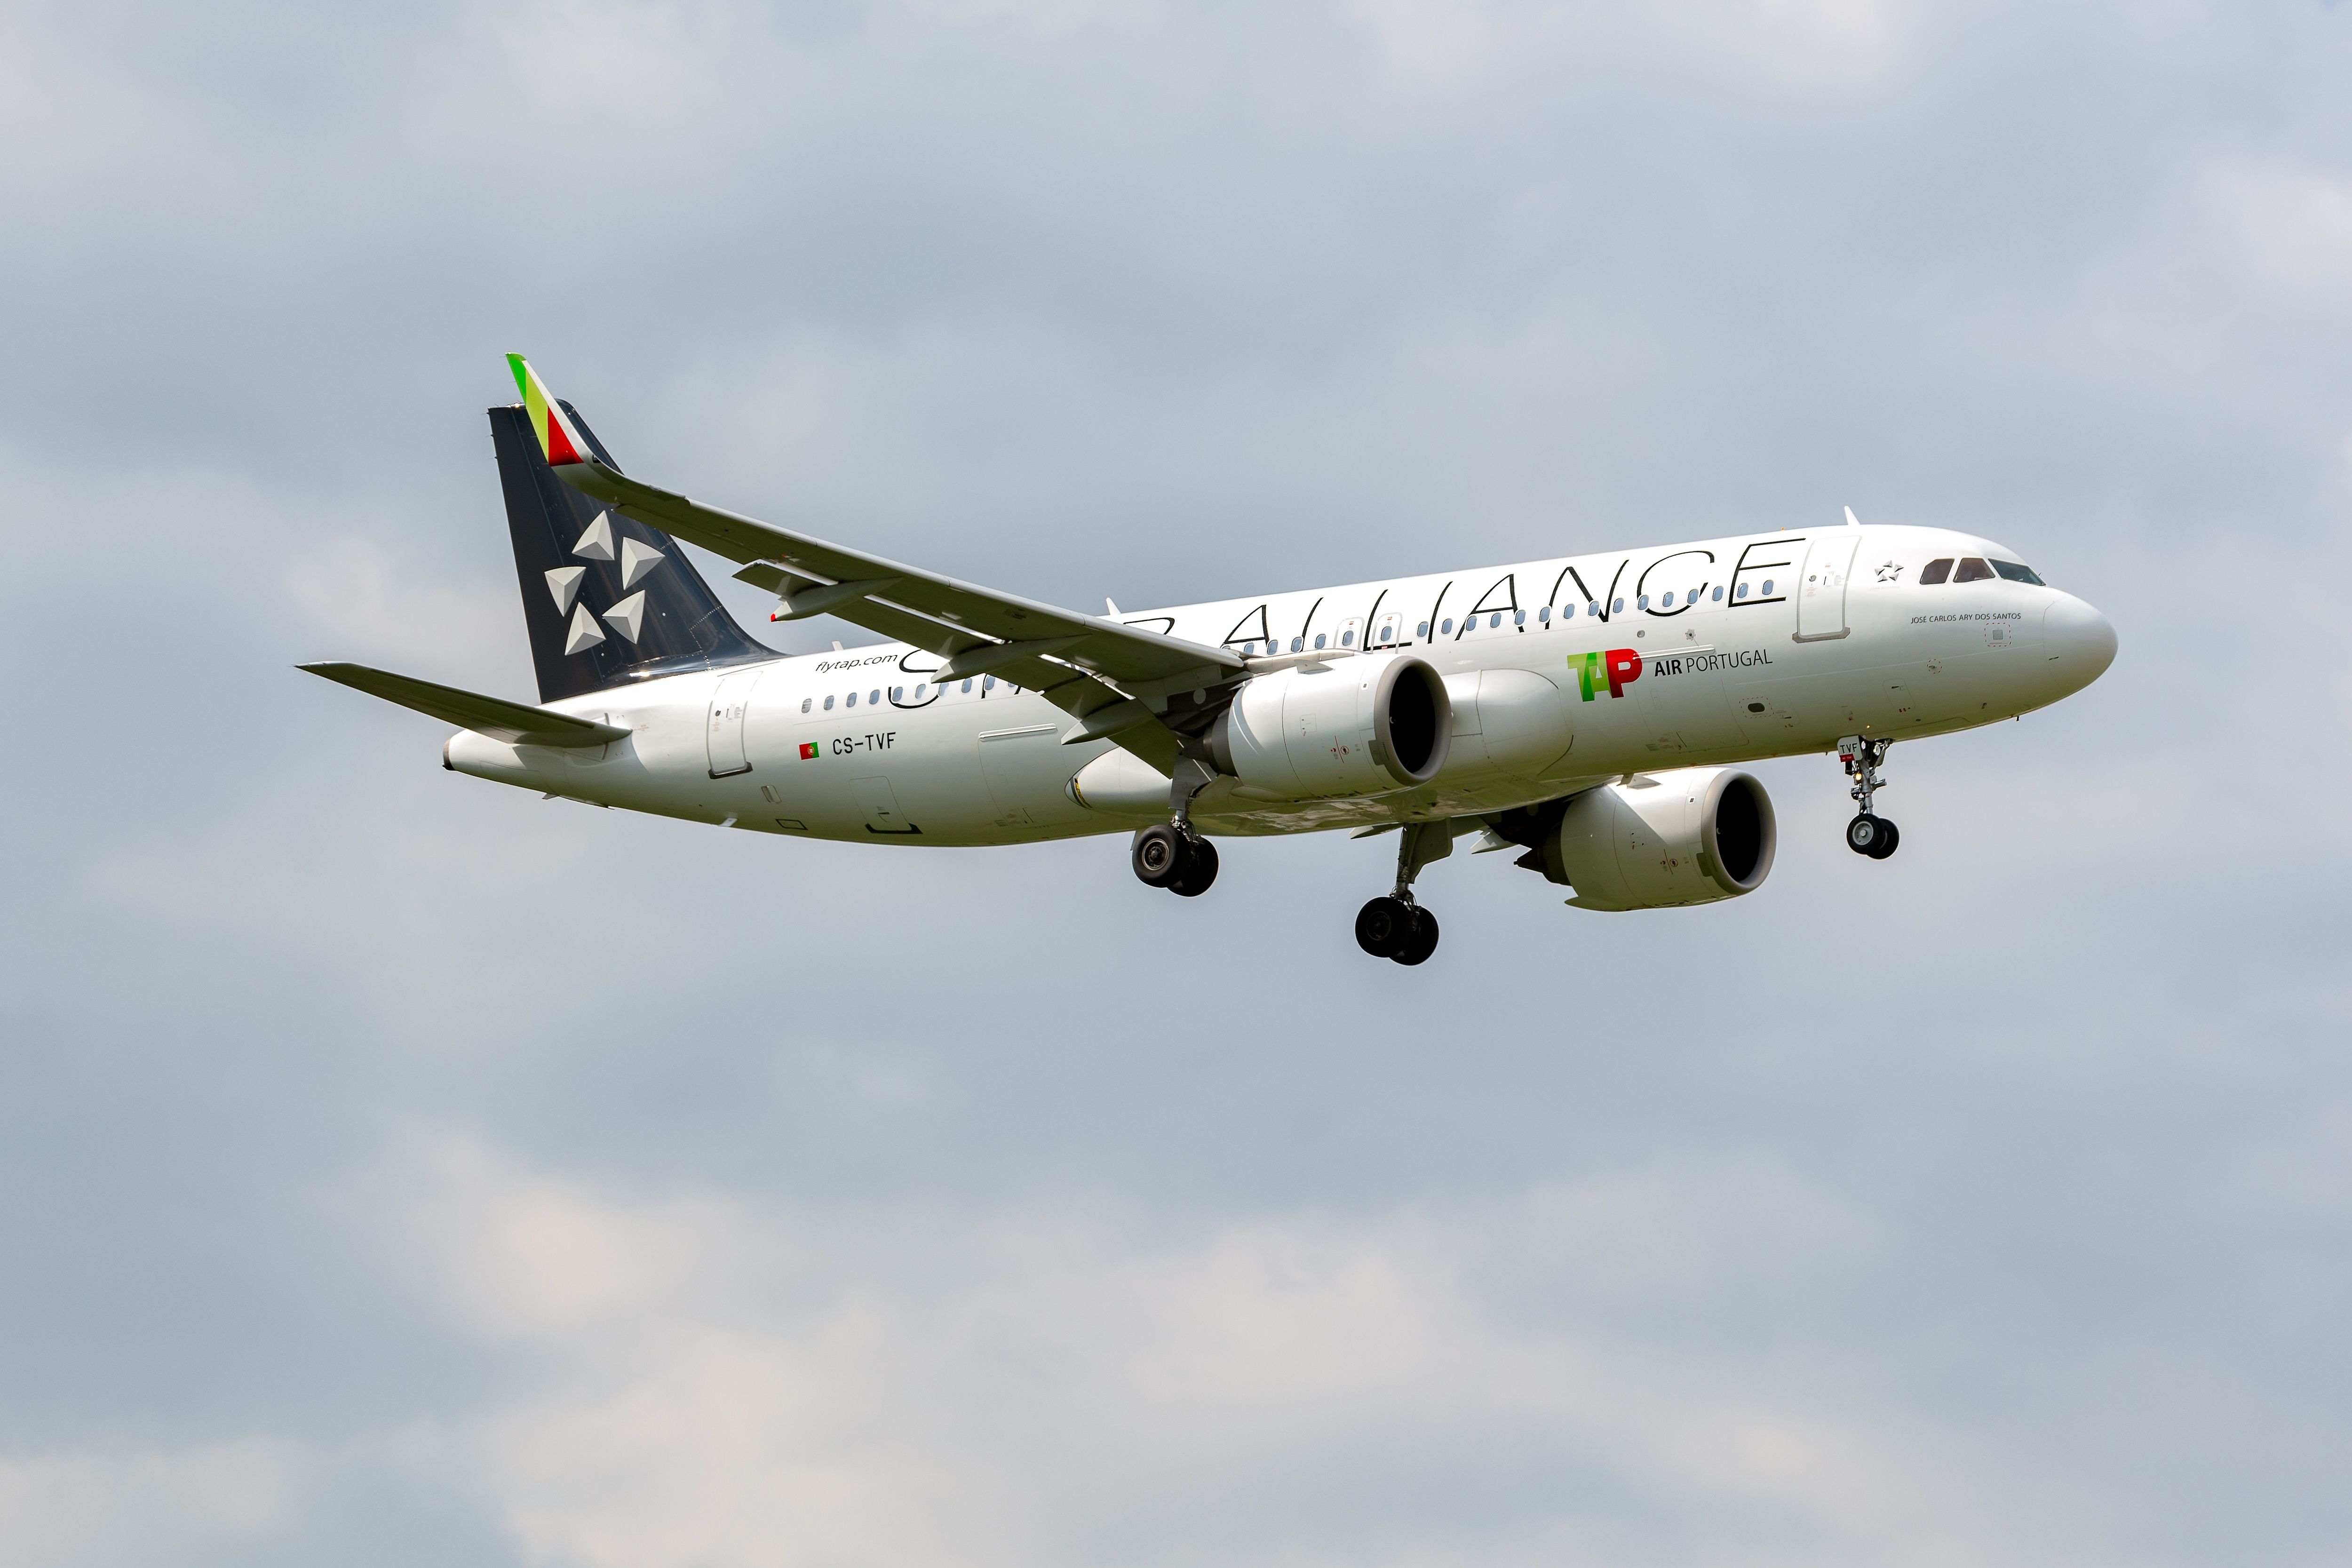 A TAP Air Portugal Airbus A320 in the Star Alliance livery